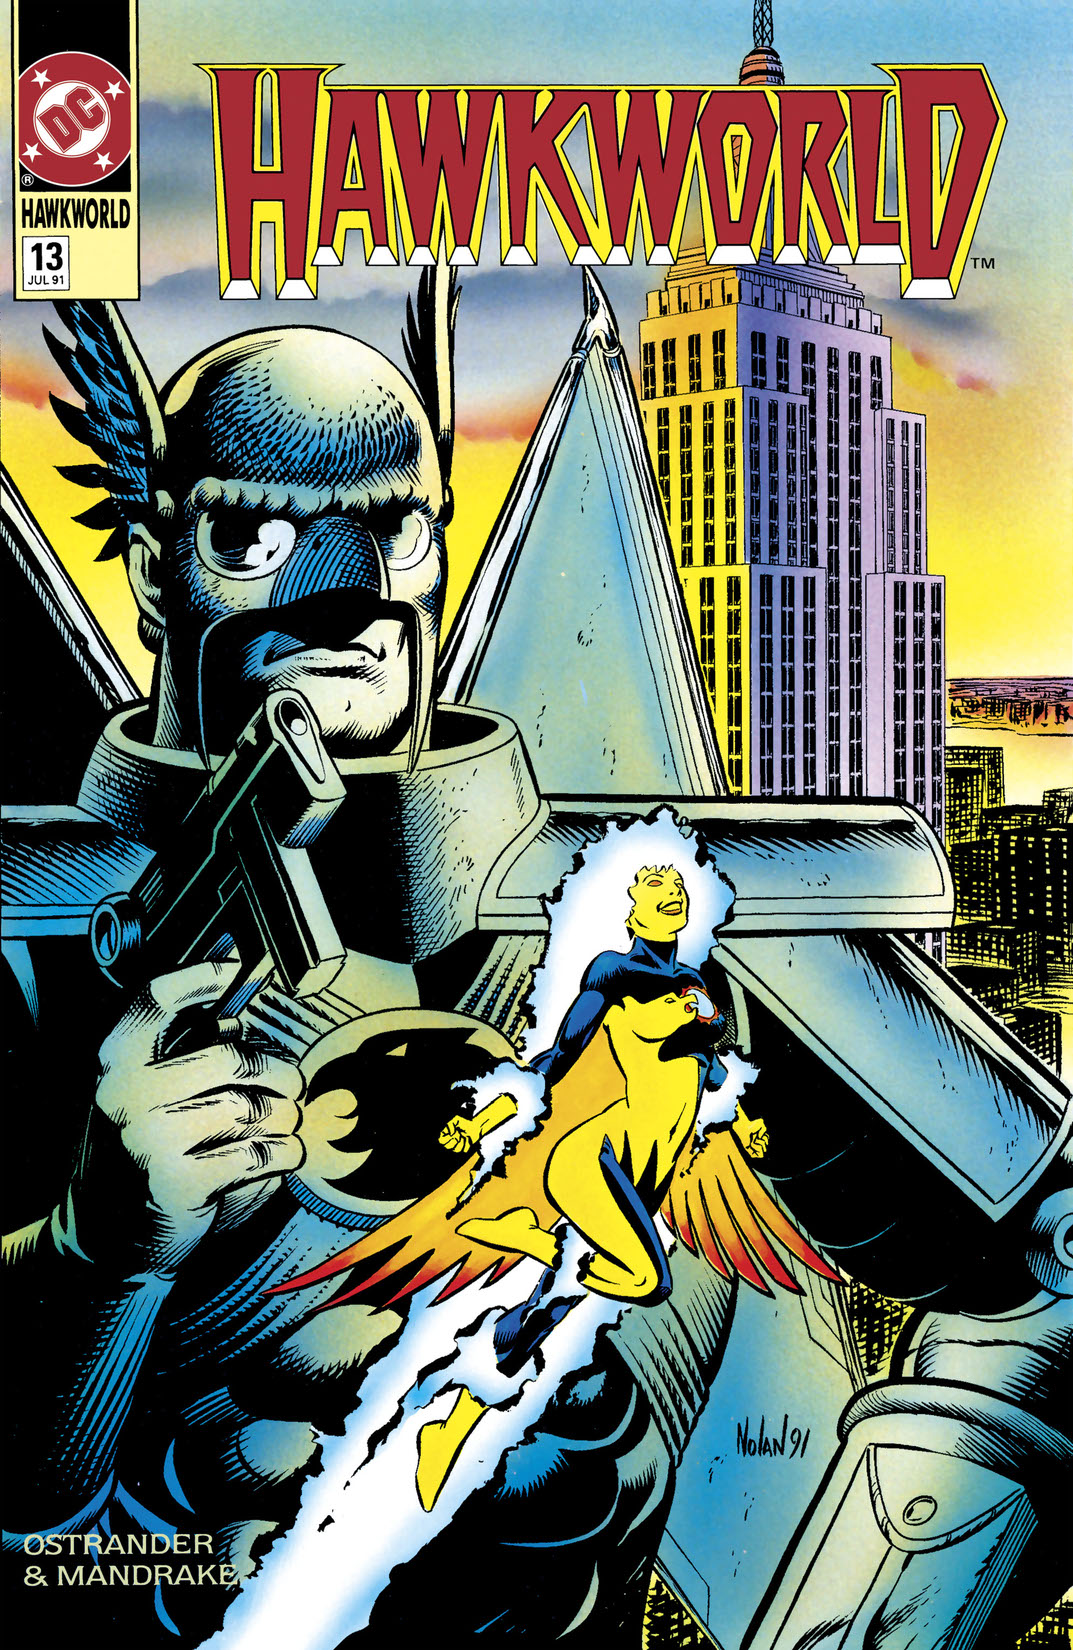 Hawkworld (1989-) #13 preview images